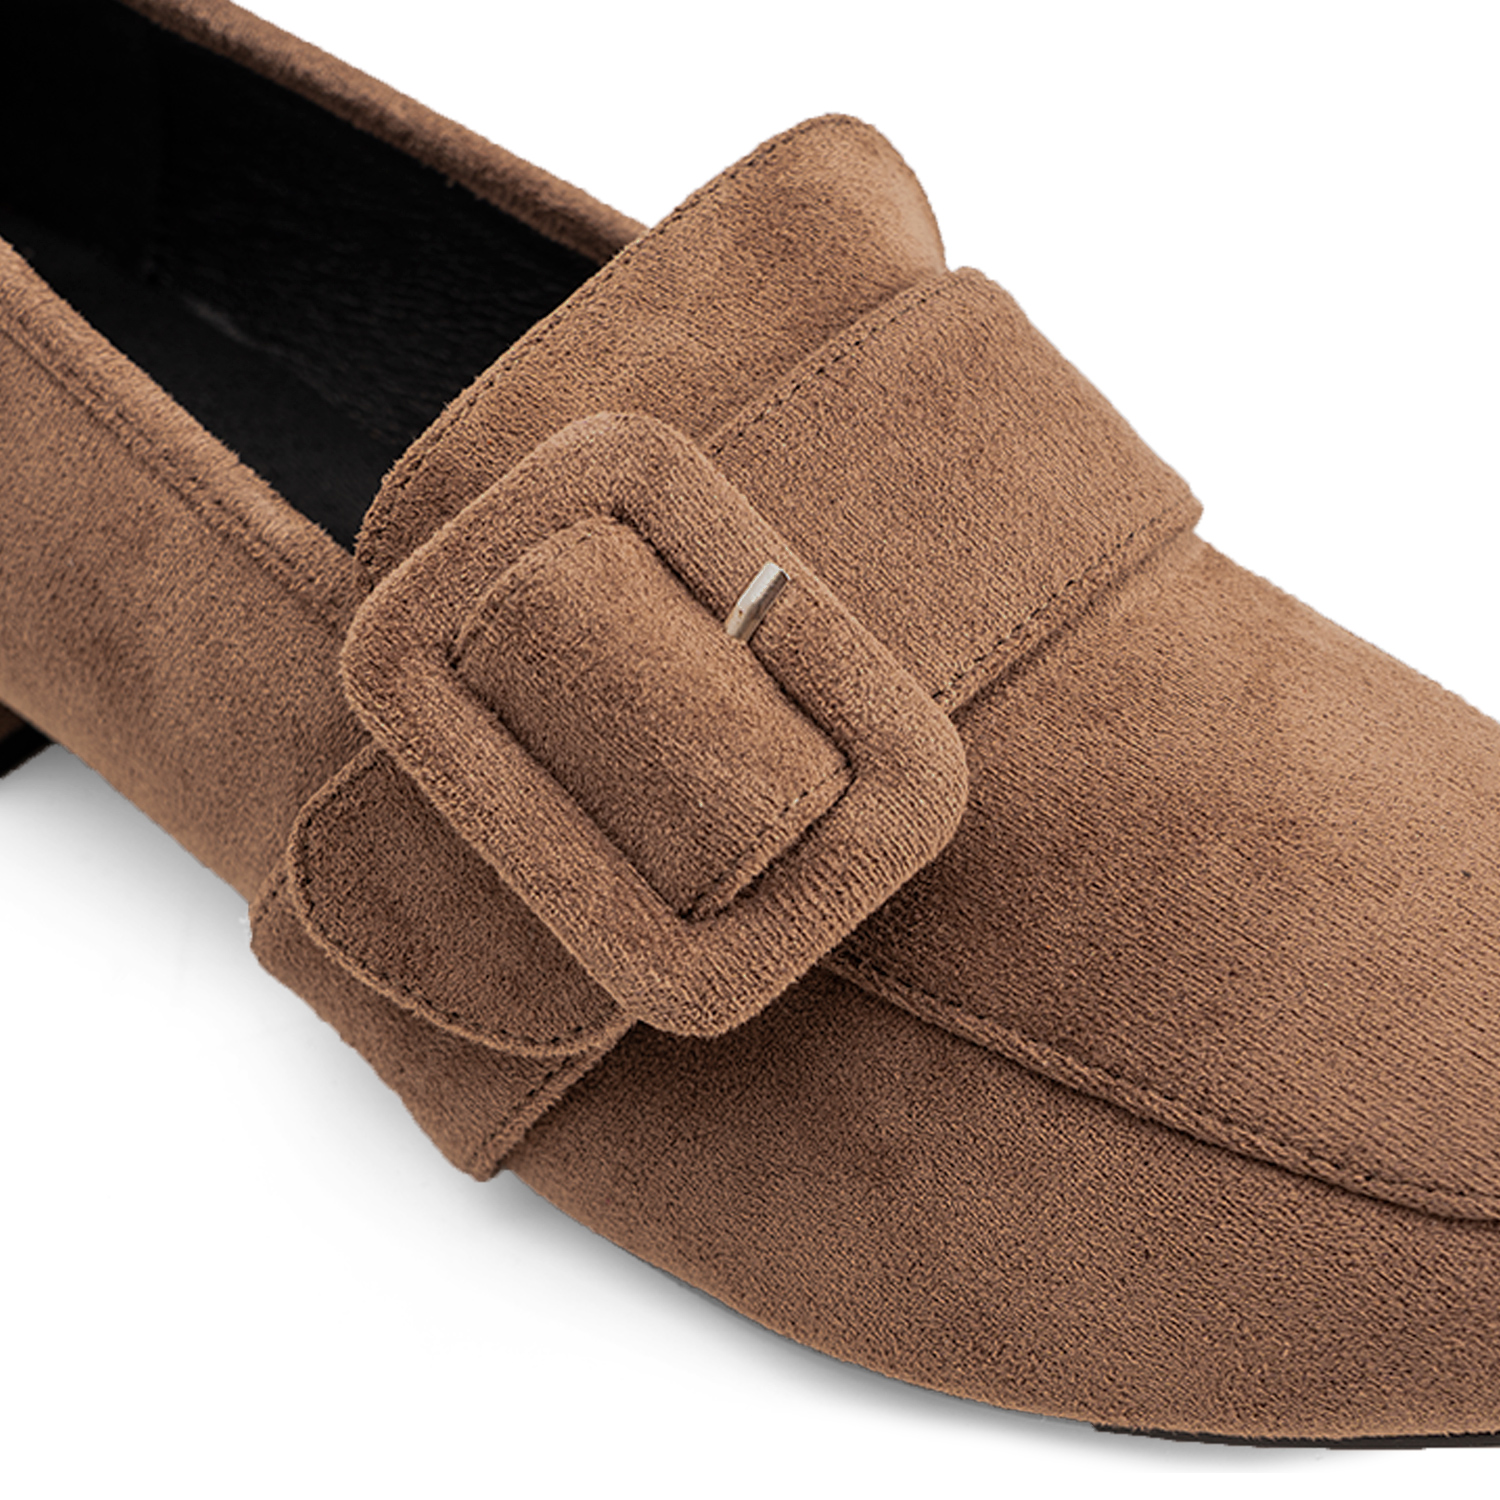 Moccasins in light brown faux suede and buckle detail 